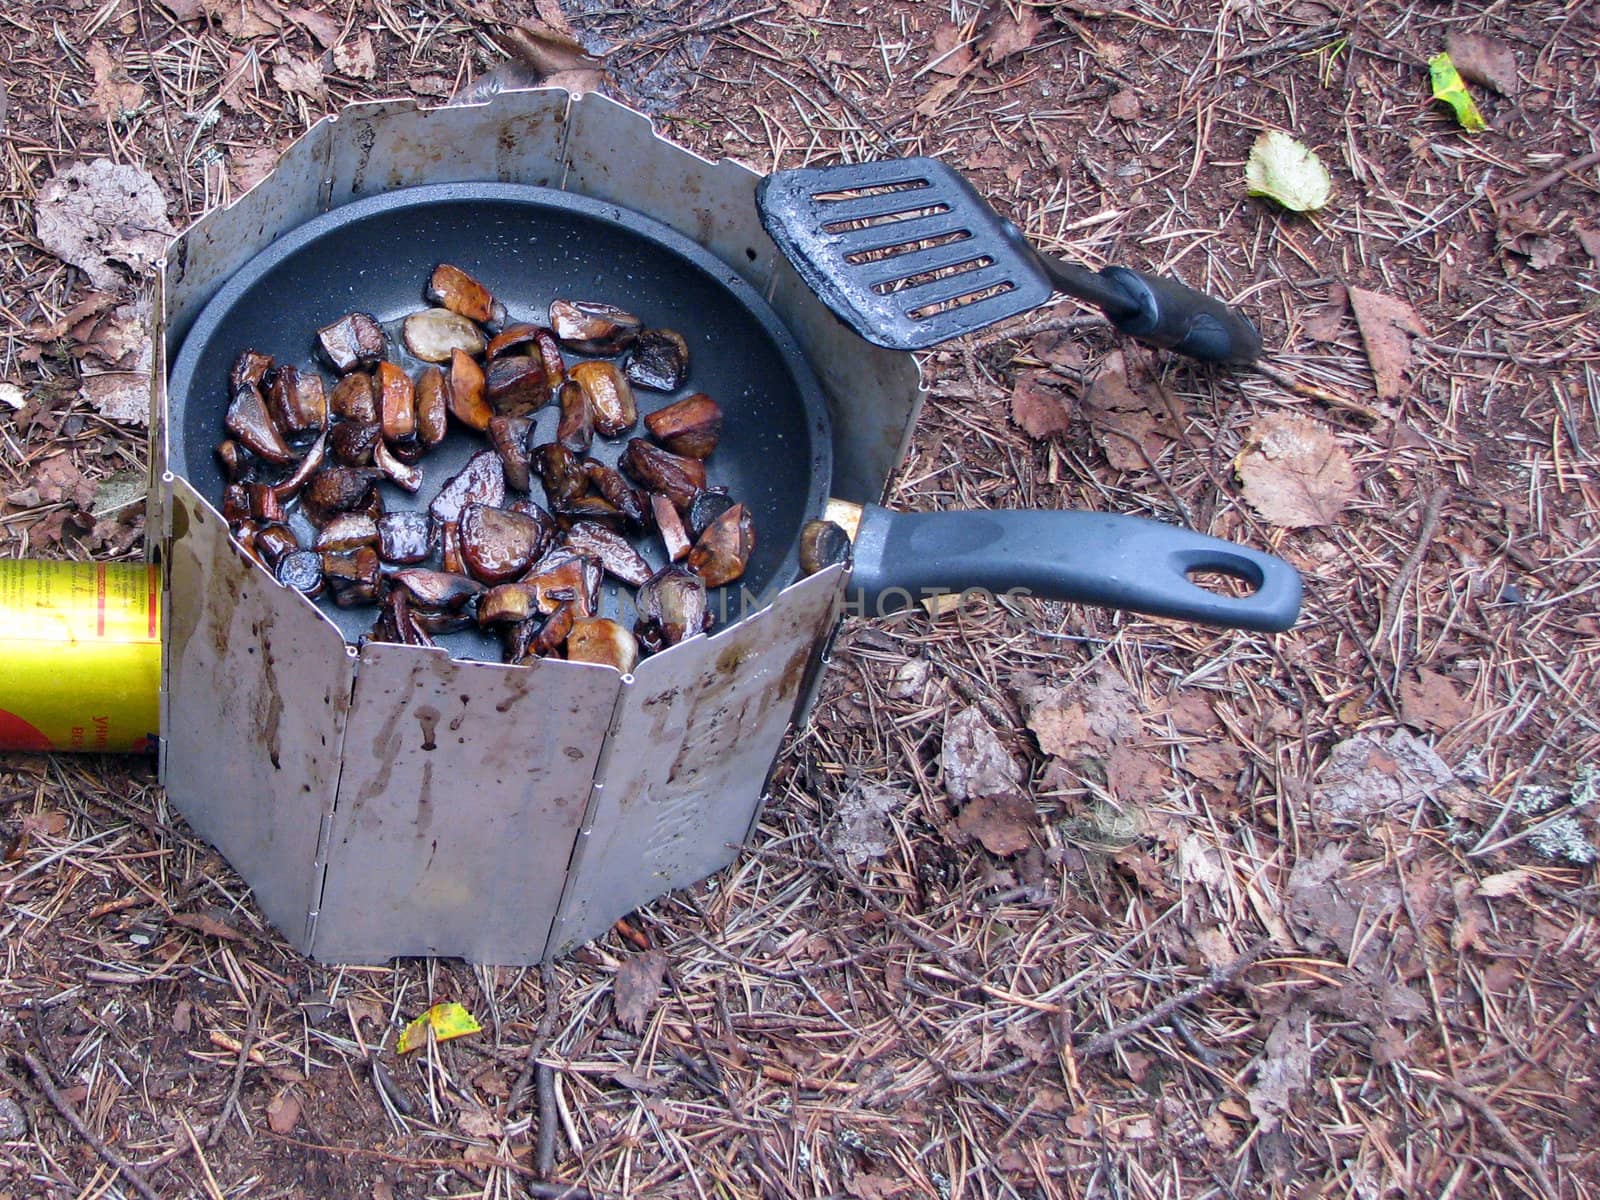 Dinner in camp conditions.  Preparation of fungi on a gas stove